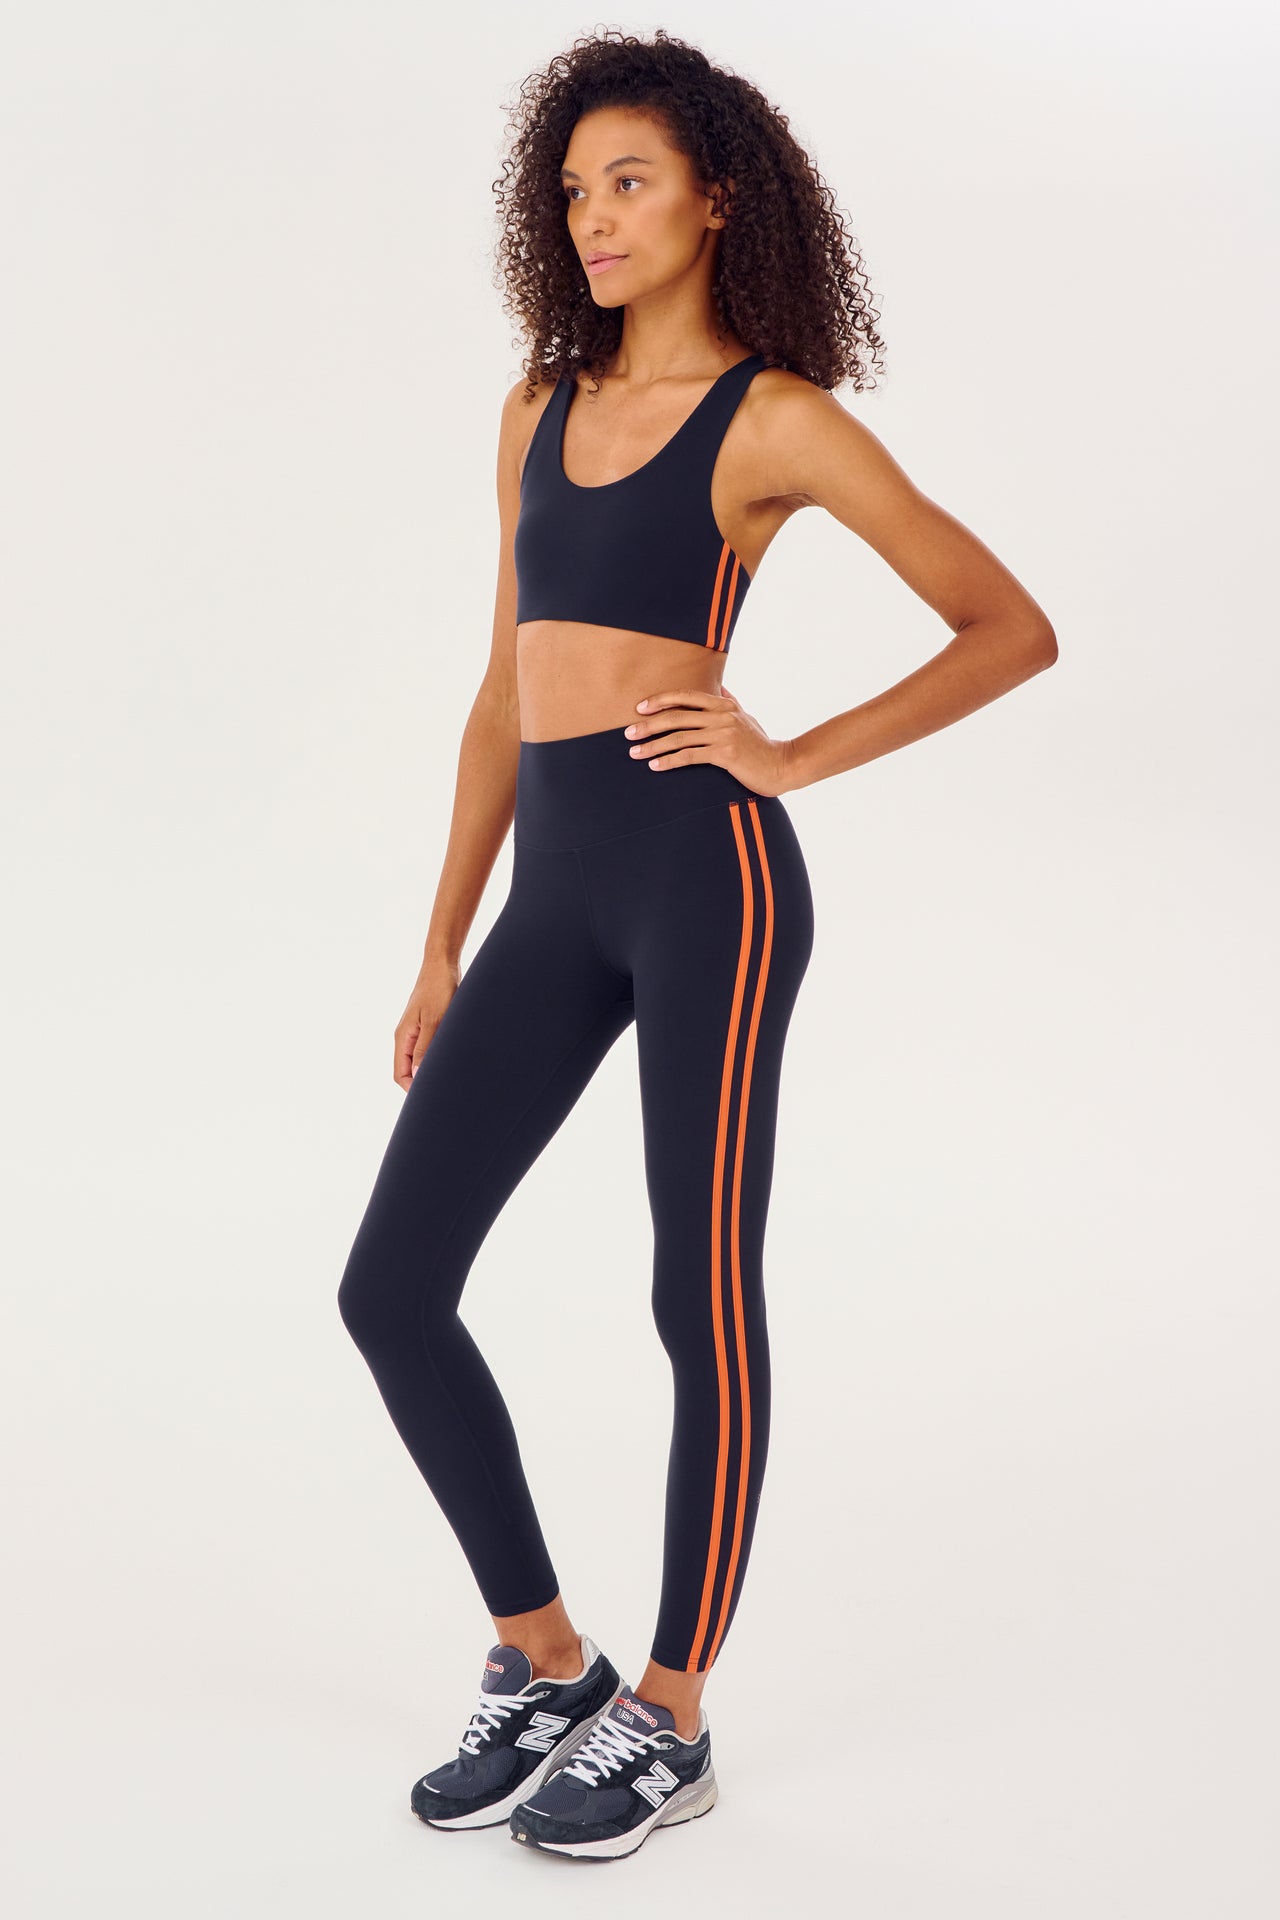 Full side view of girl wearing dark blue leggings with two thin red stripes down the side and a dark blue sports bra with dark blue shoes